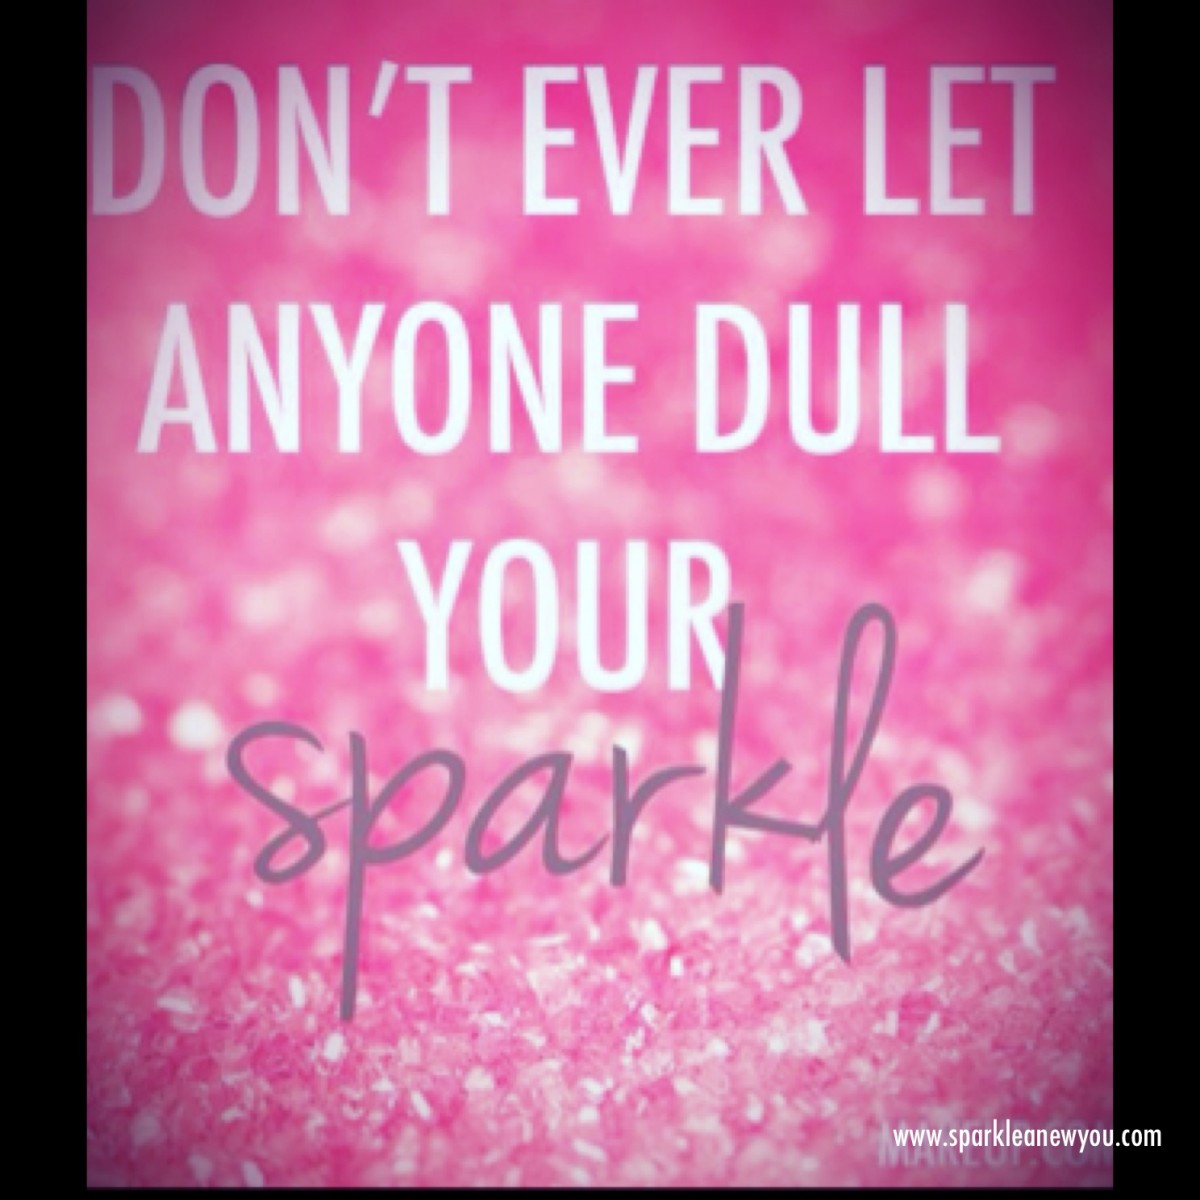 Don't let someone dull your sparkle.